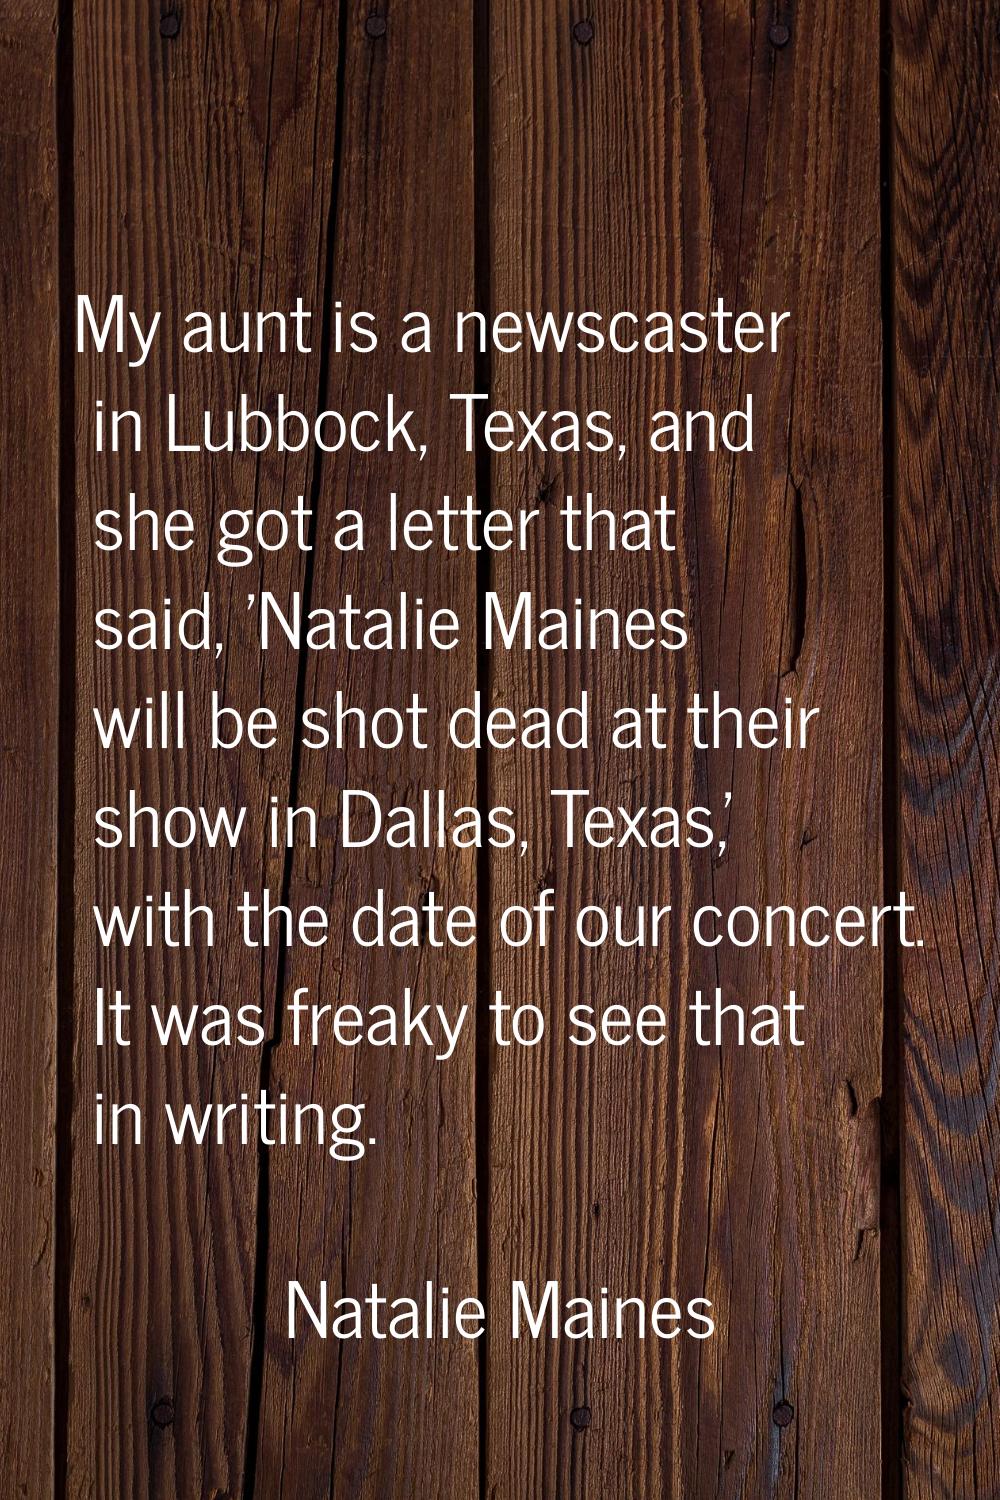 My aunt is a newscaster in Lubbock, Texas, and she got a letter that said, 'Natalie Maines will be 